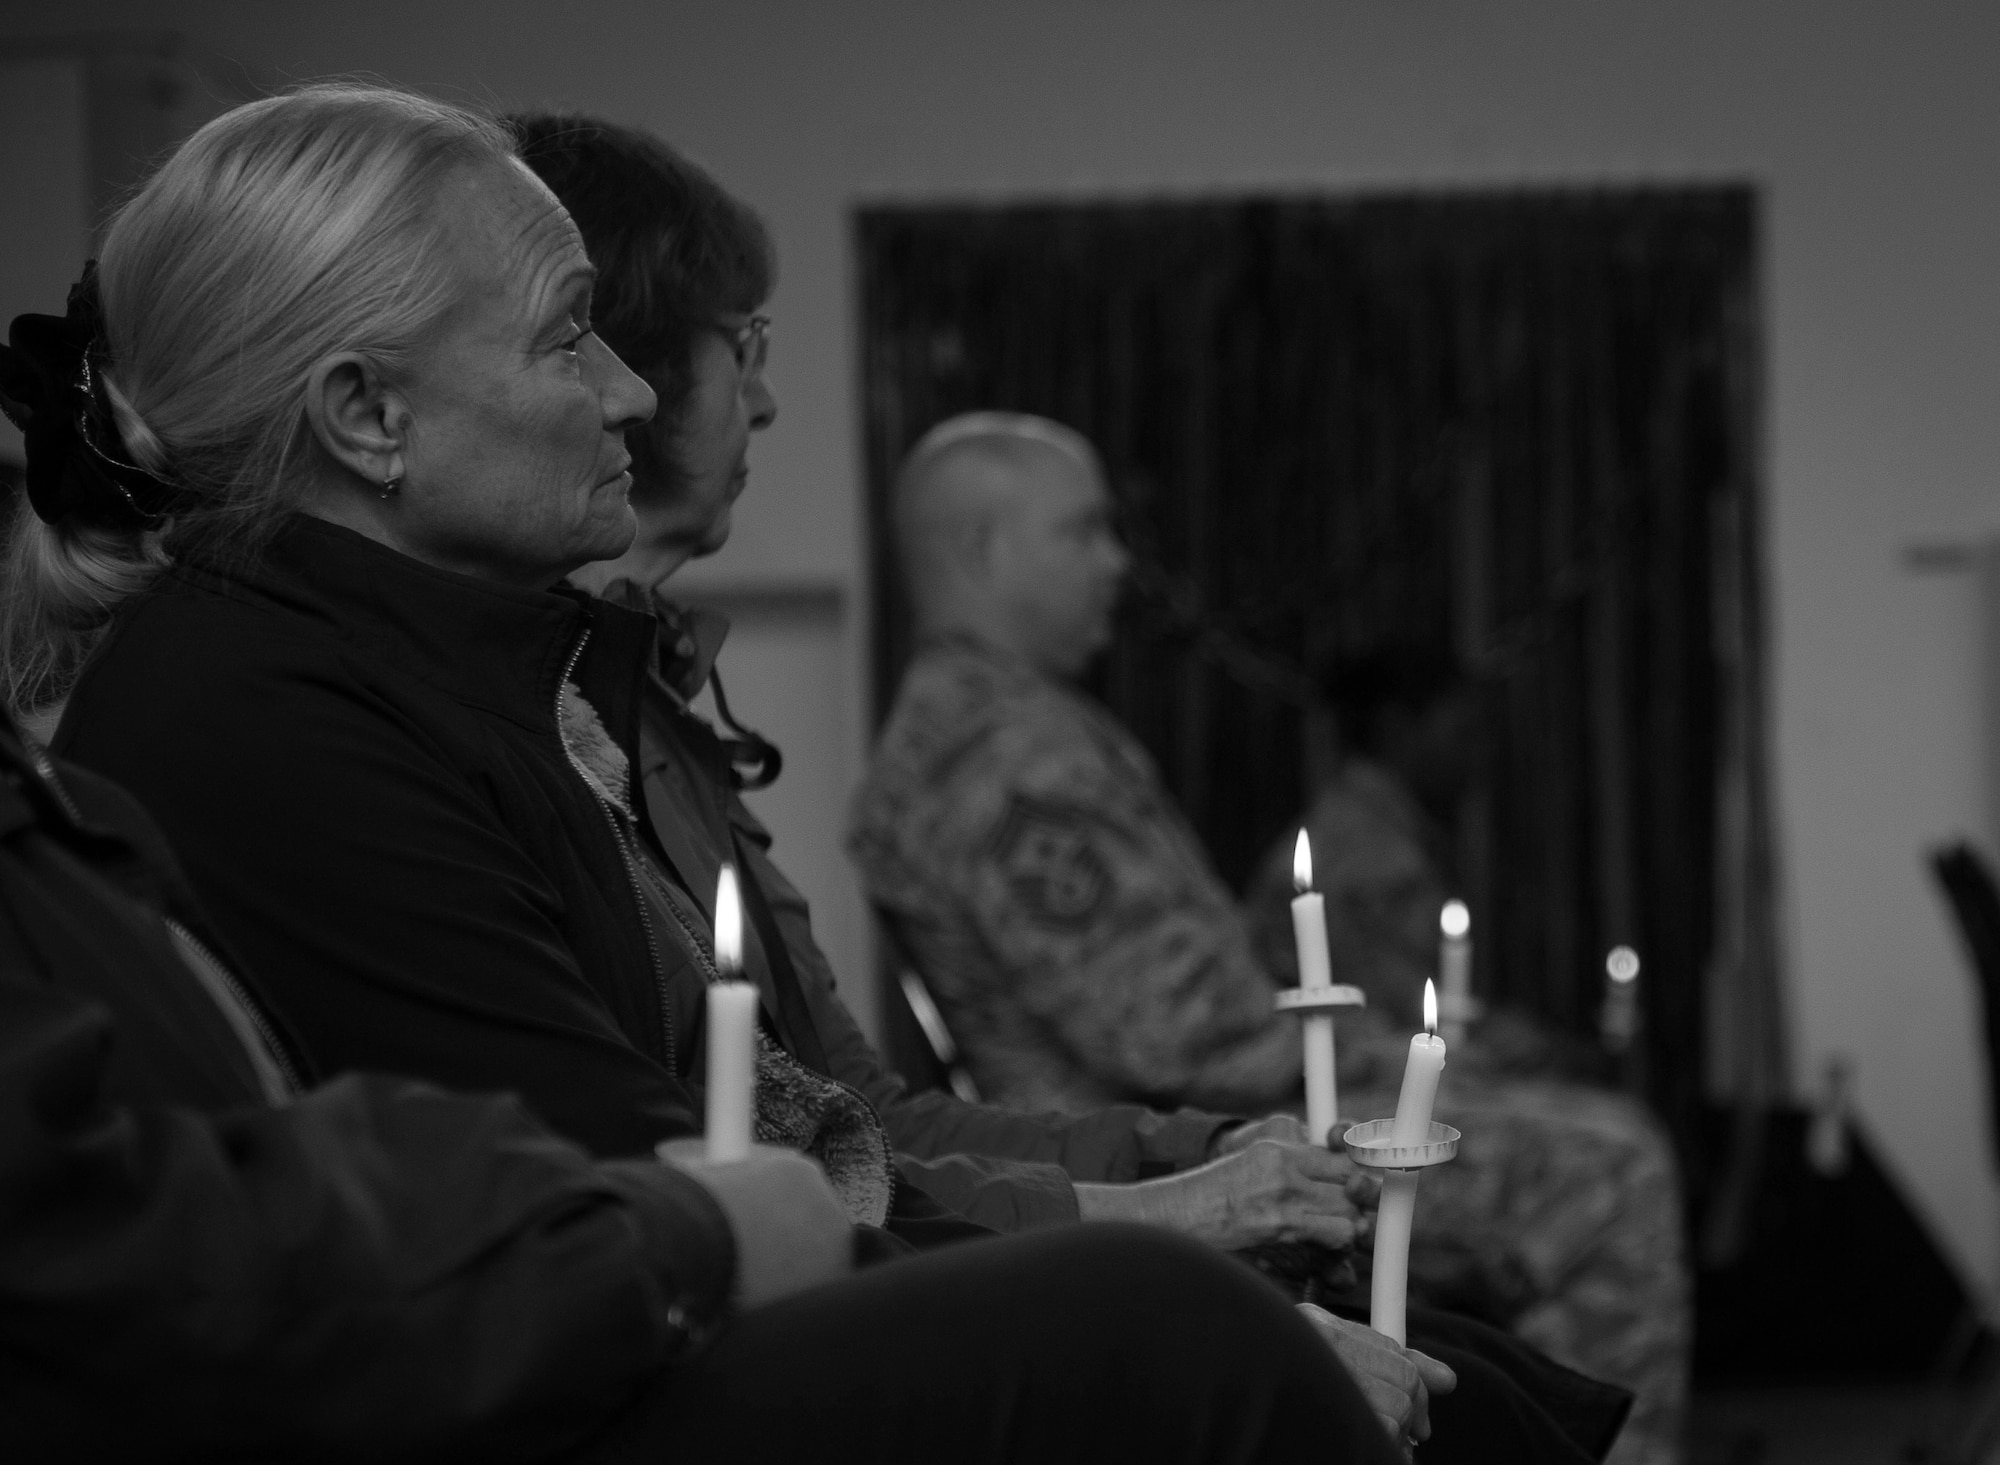 A woman sits and listens to guest speakers at a candlelight vigil at Ramstein Air Base, Germany, Oct. 27, 2016. According to the Center for Disease Control and Prevention, over the course of a year, more than 10 million U.S. citizens are victims of domestic violence, sexual abuse, child violence and bullying or suicide. The devastating physical, emotional, and psychological consequences of interpersonal violence can cross generations and last lifetimes. (U.S. Air Force photo by Airman 1st Class Lane T. Plummer)